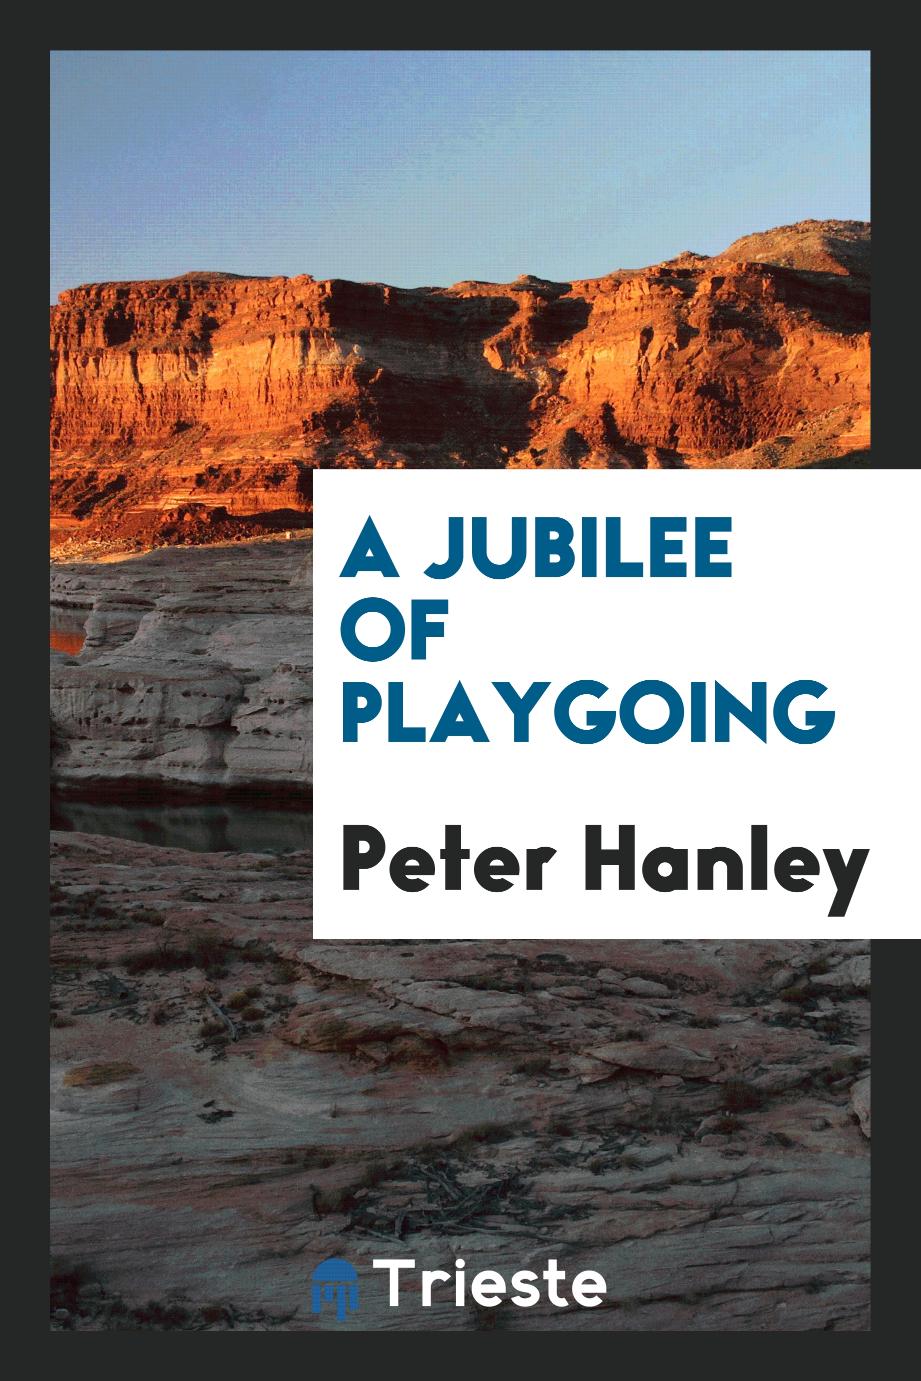 A Jubilee of Playgoing